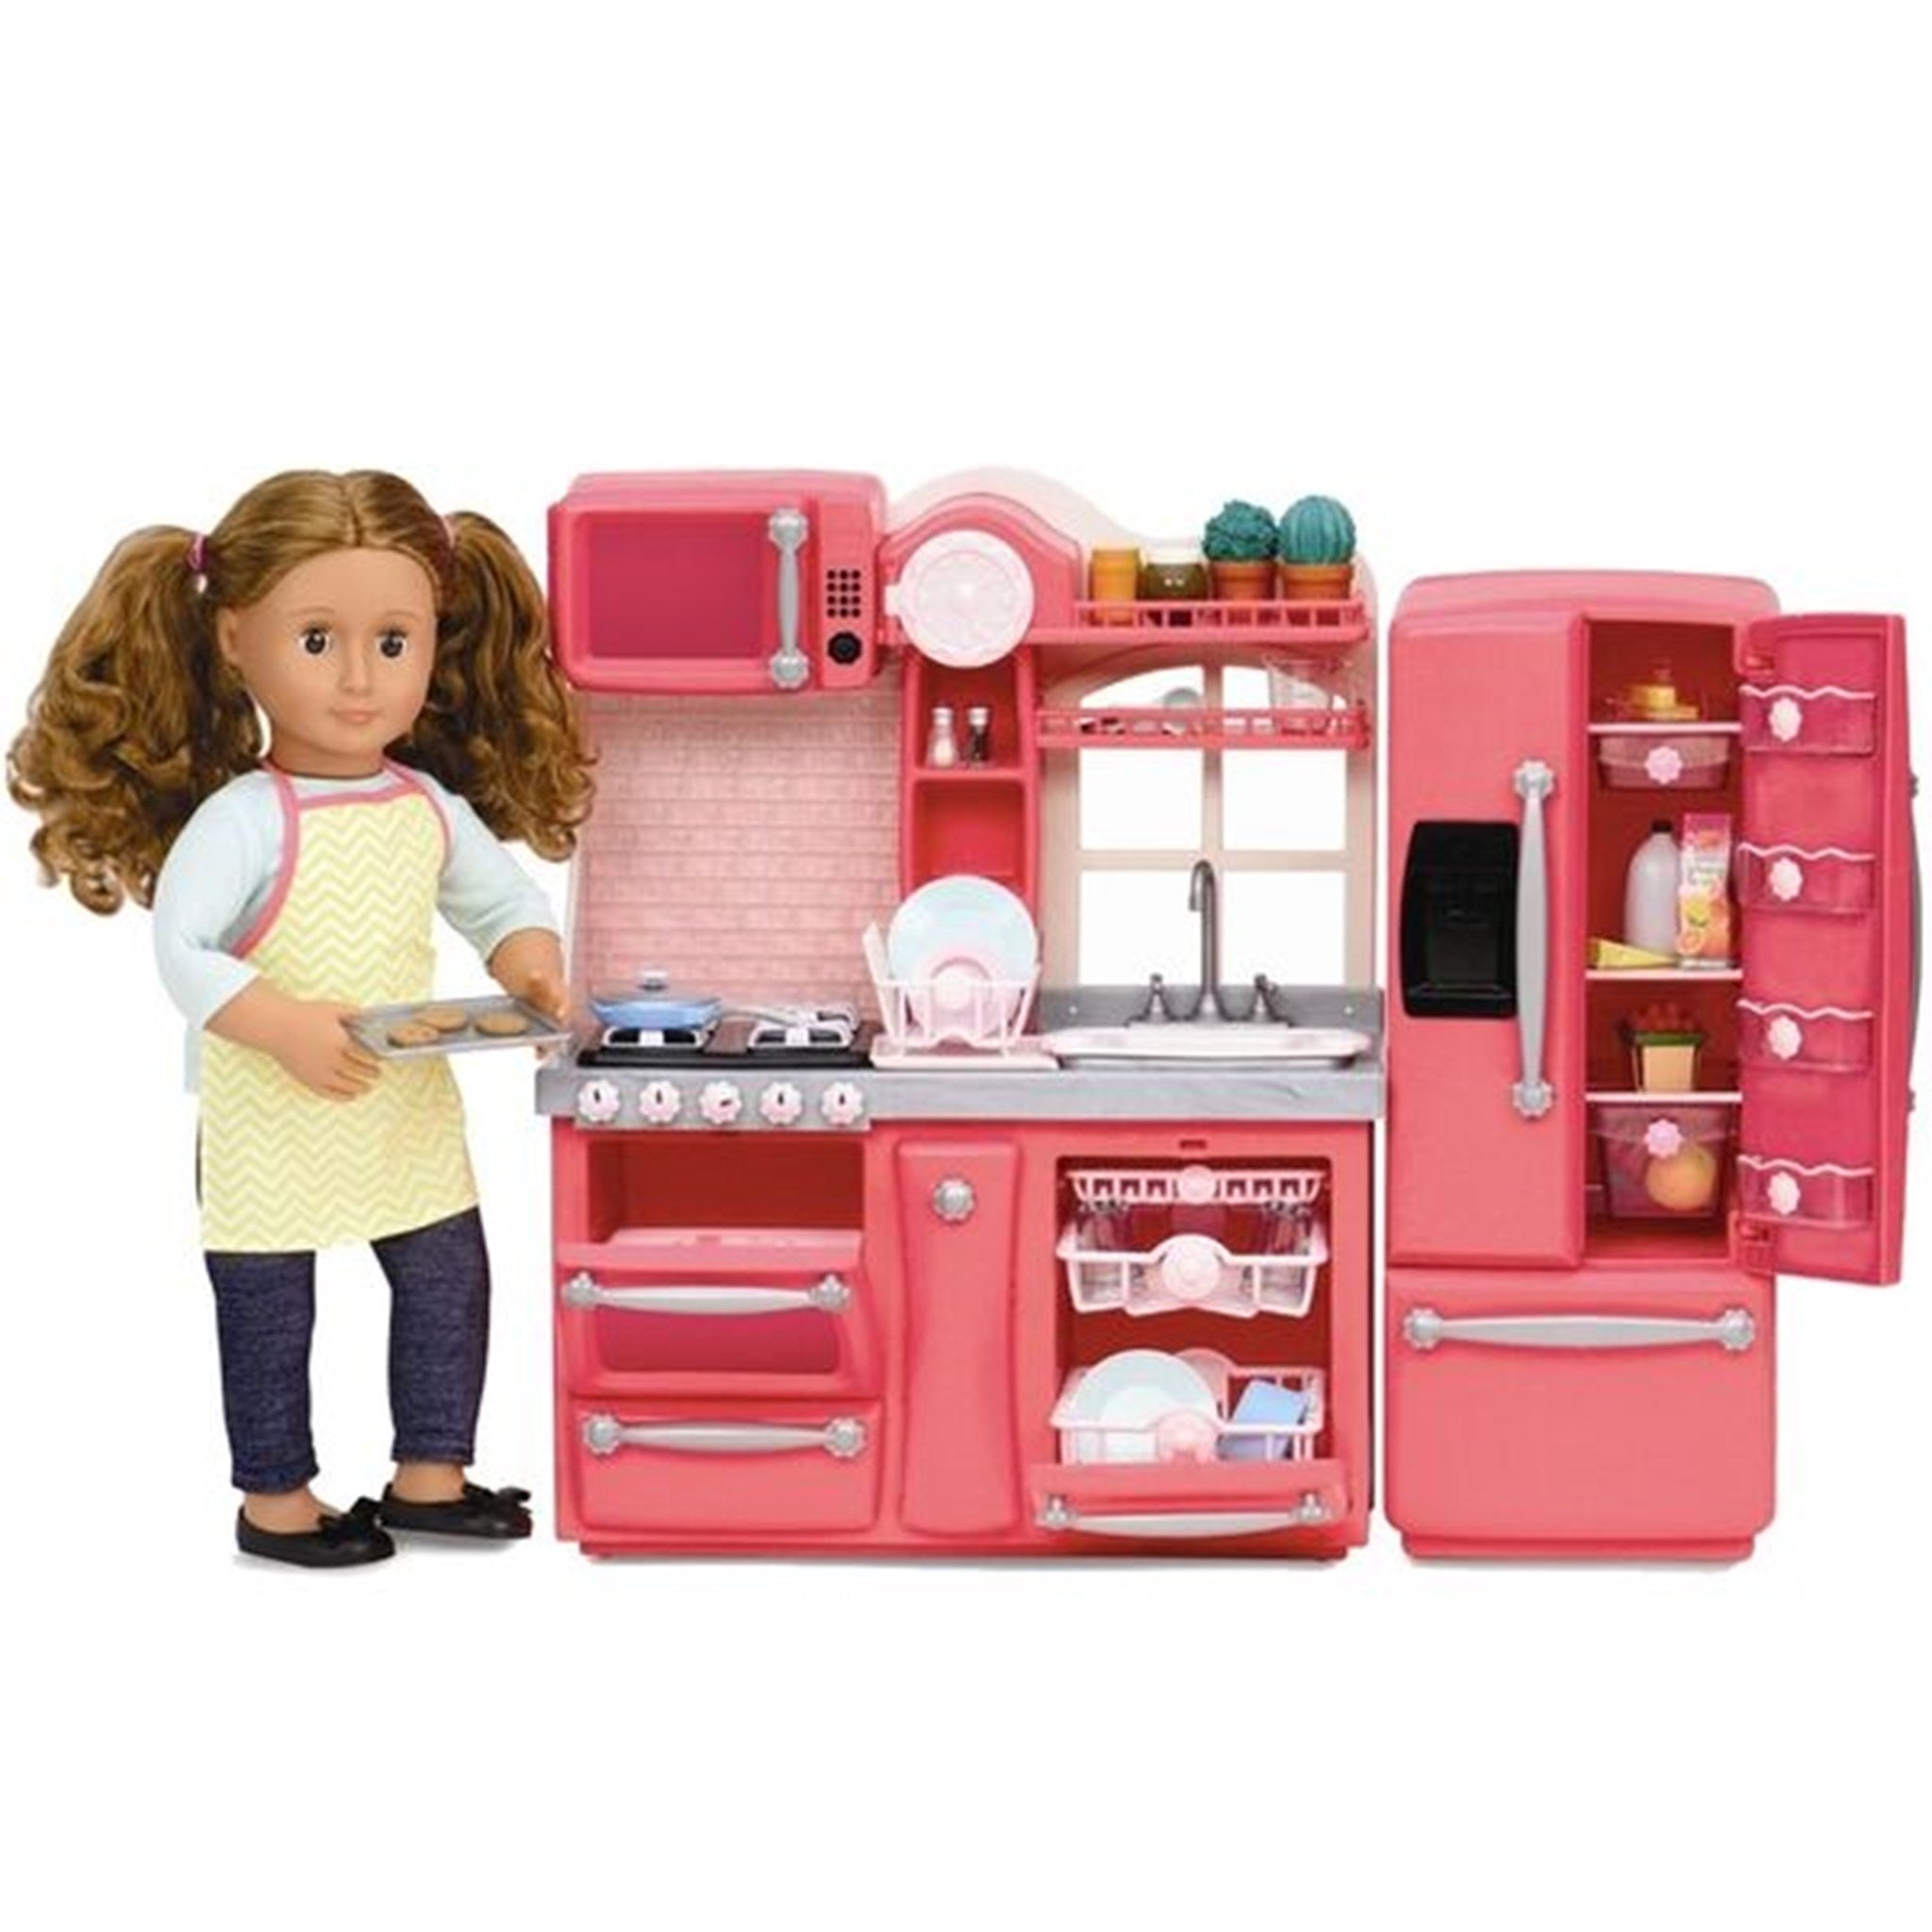 Our Generation Kitchen Pink 3